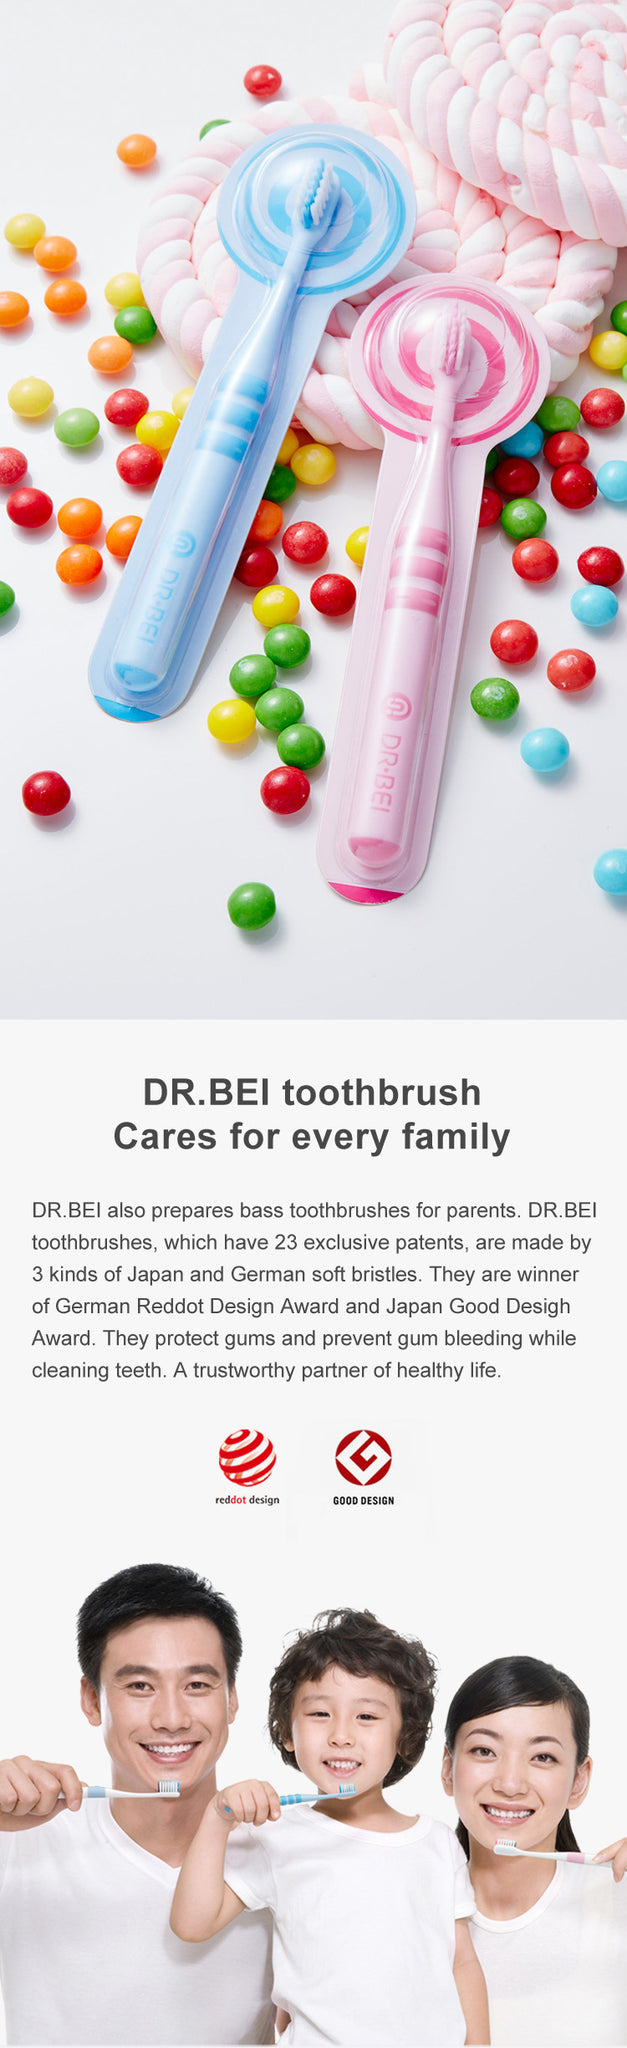 DR.BEI Children Toothbrush (6-12 Years old) Xiaomi Youpin DR·BEI Mini Kids Toothbrush Deep Clean Soft Sandwish-bedded Texture Dental Oral Care Health for Children Teeth Brush Cleaning